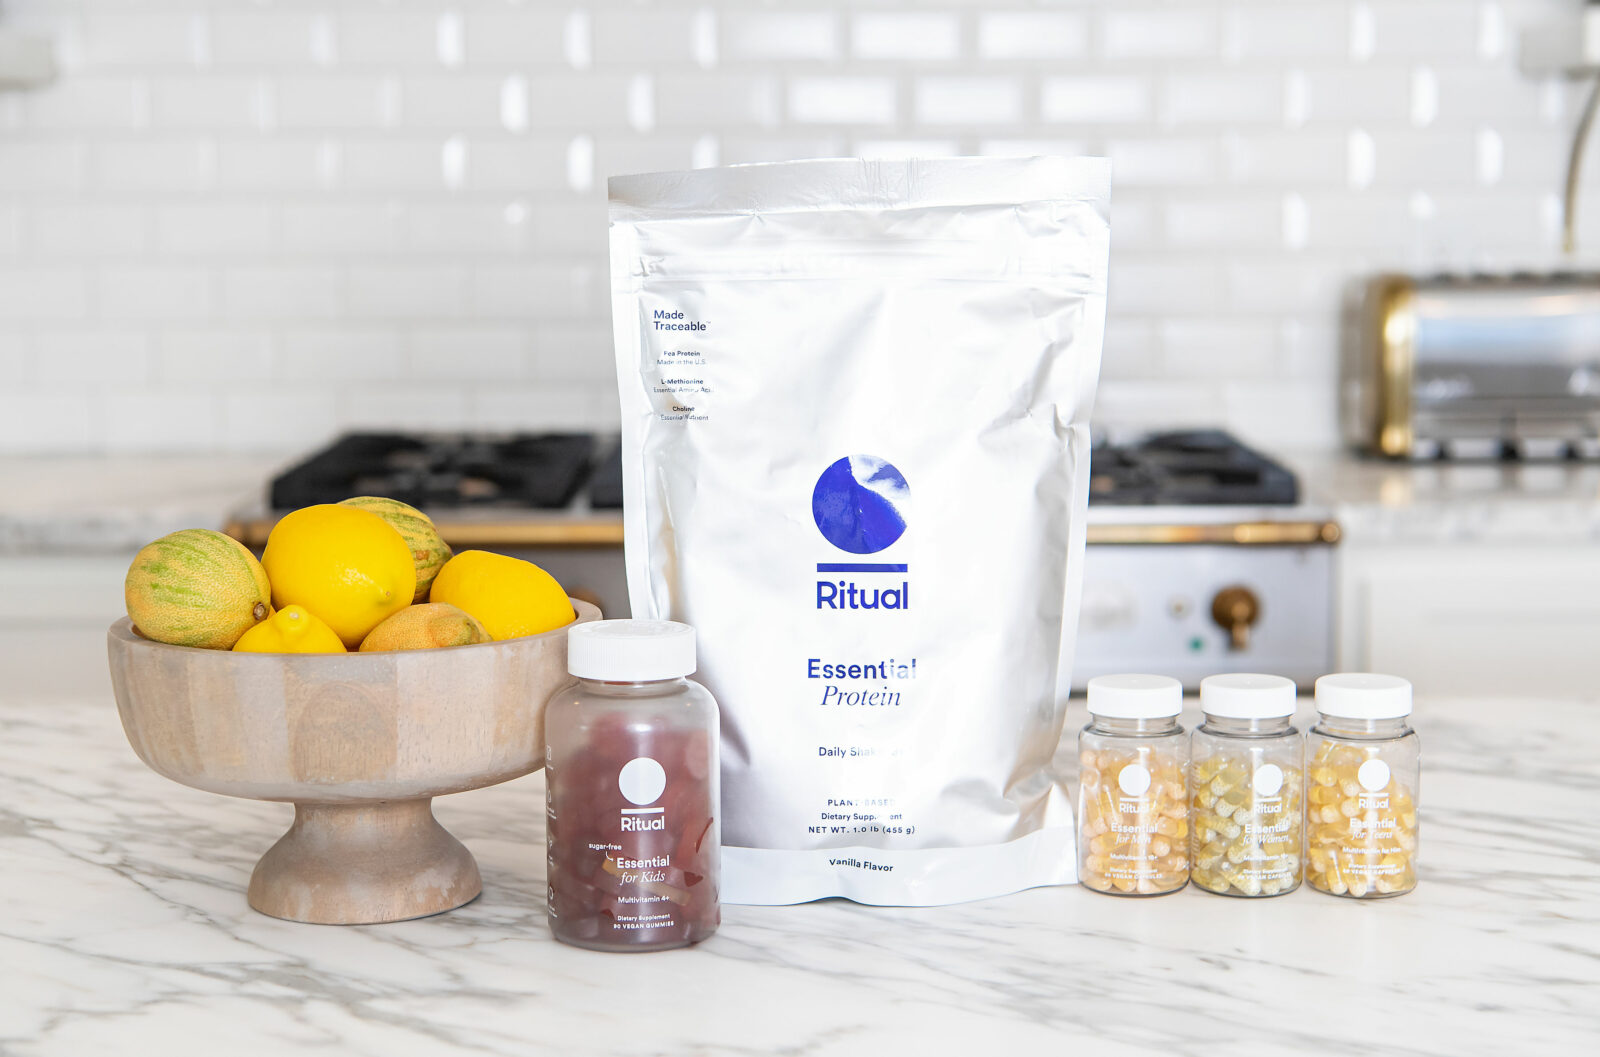 Healthy Living by popular Houston lifestyle blog, The House of Fancy: image of Ritual essential protein powder next to a wooden bowl of lemons and bottles of Ritual vitamins. 